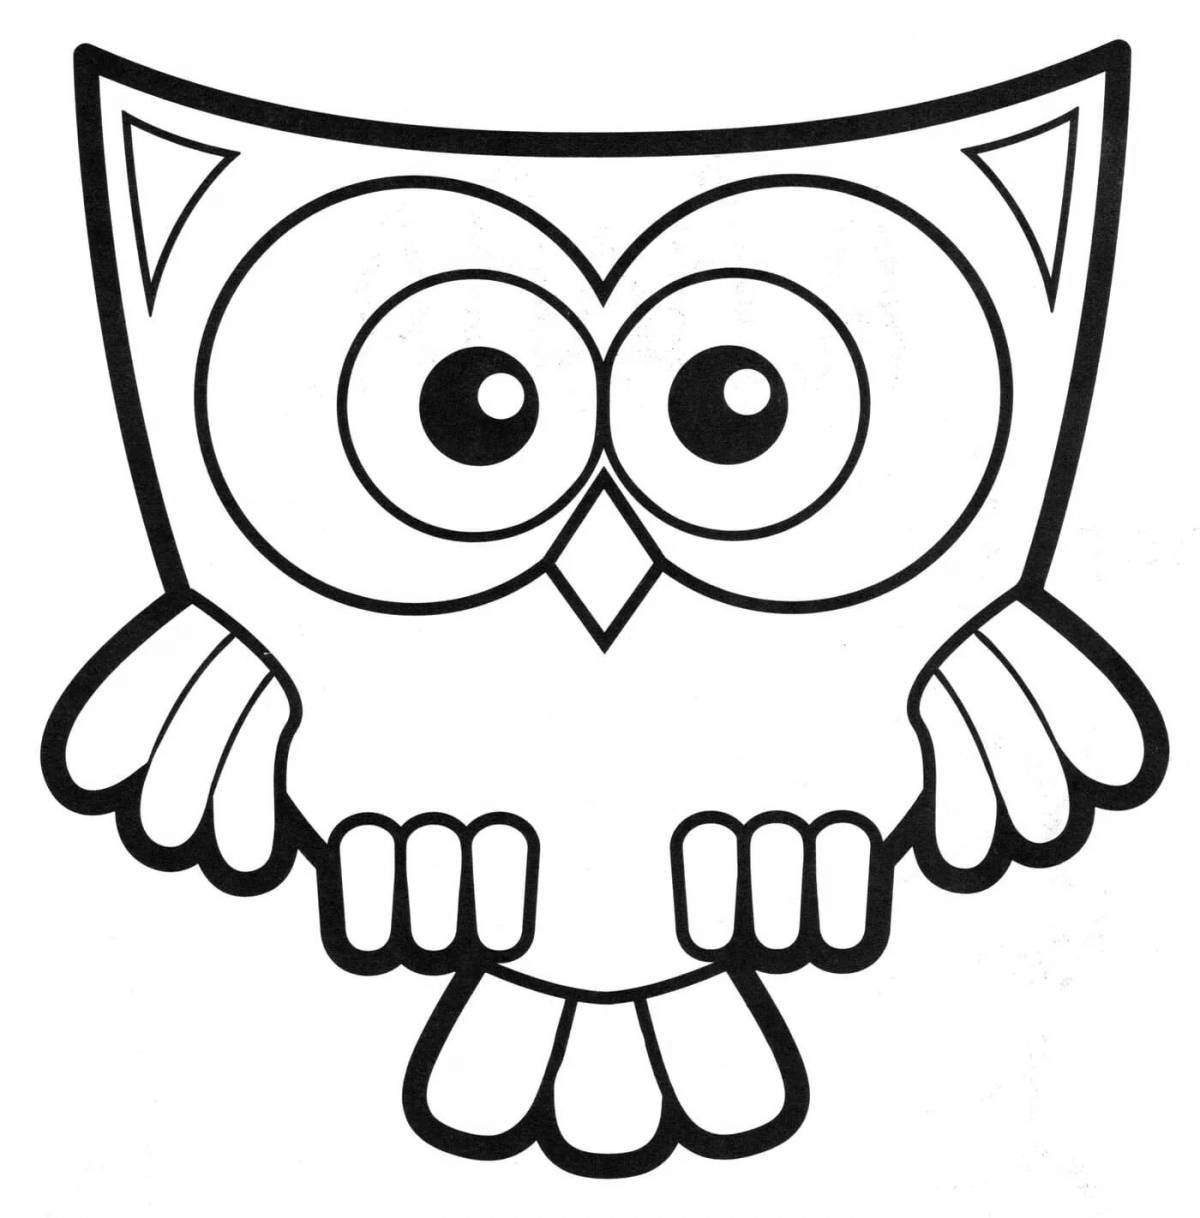 Coloring page mischievous owl